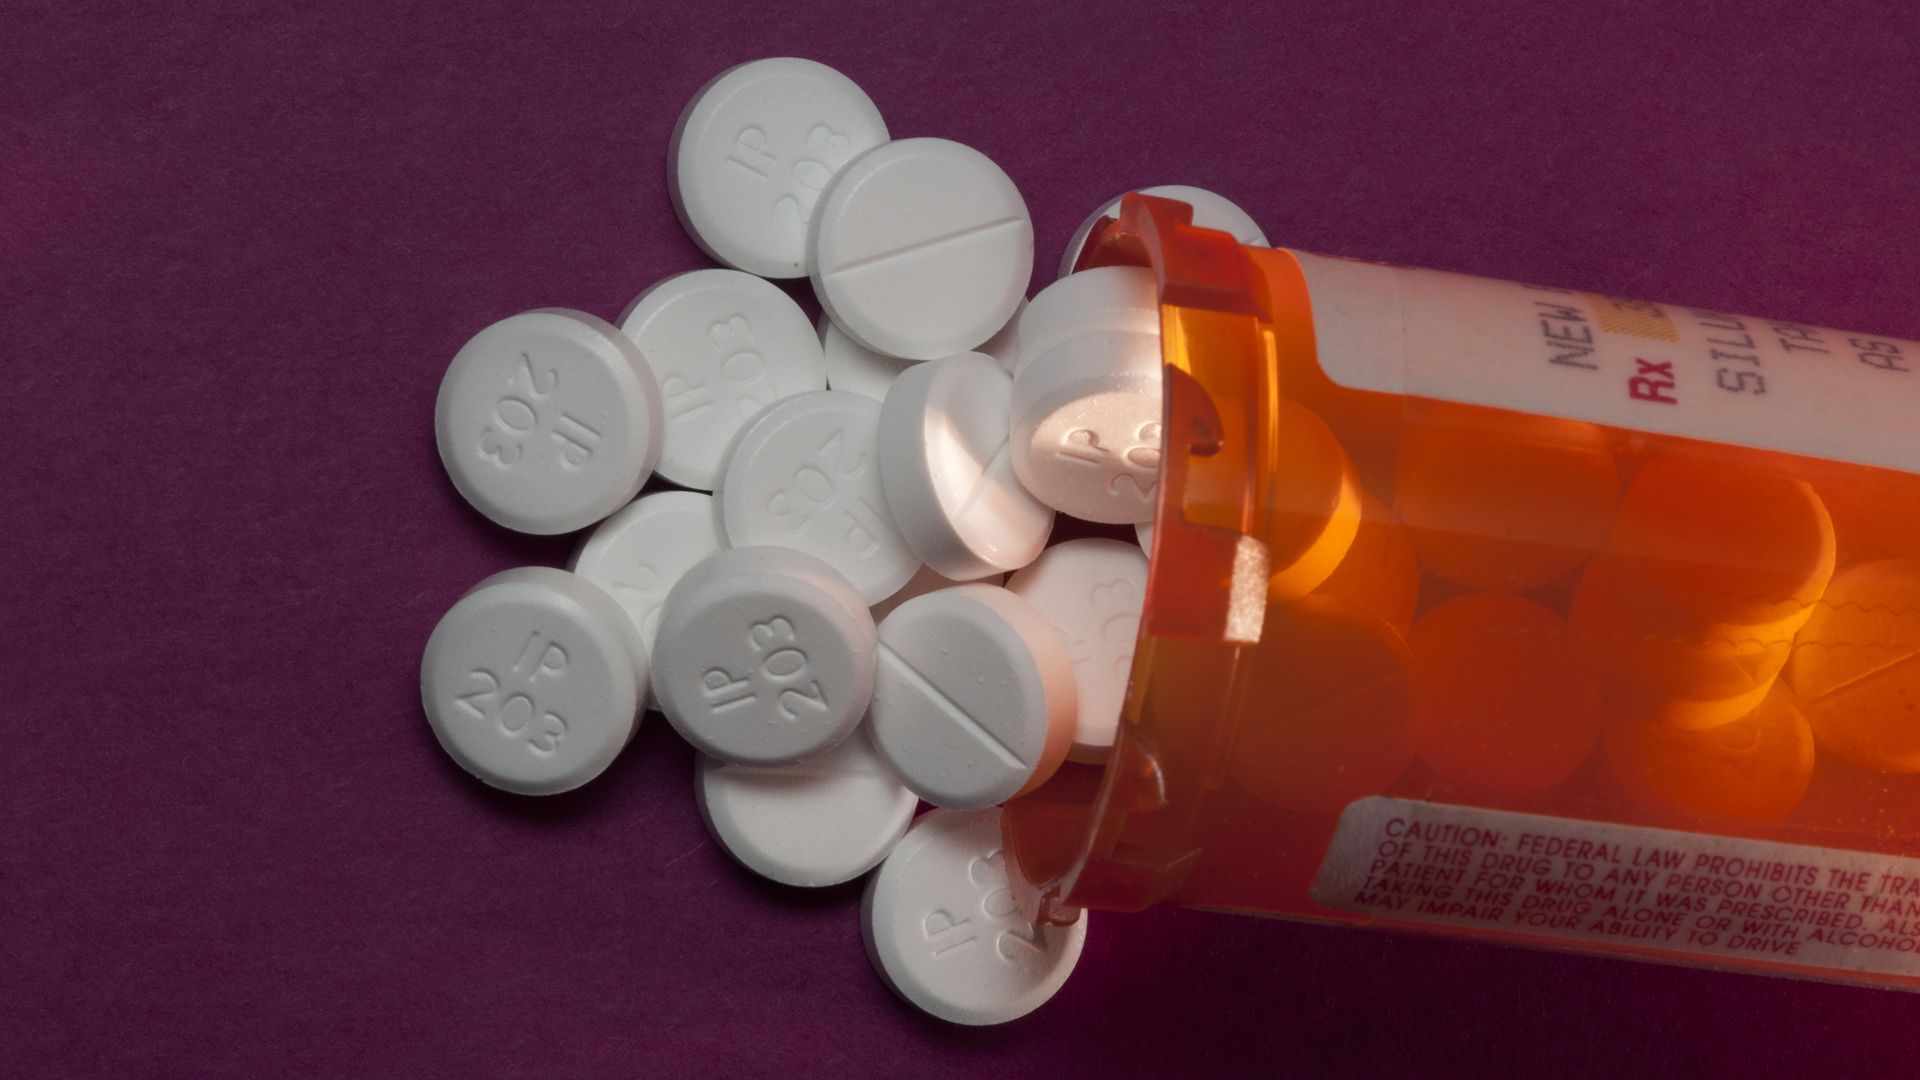 A bottle of oxycodone pills on a table.